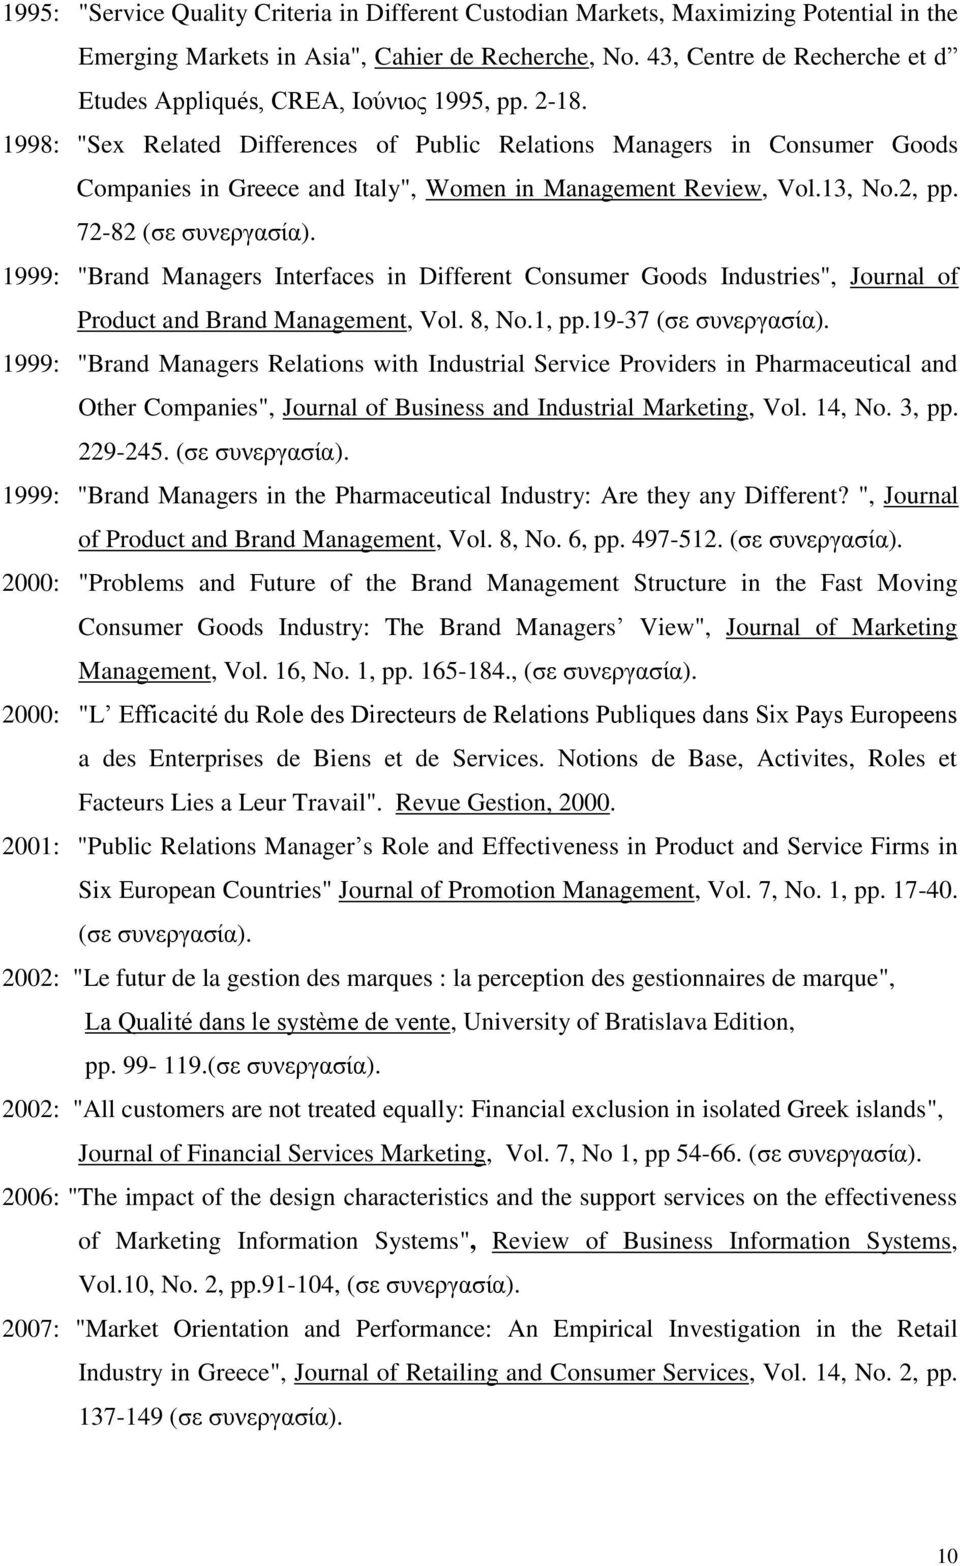 1998: "Sex Related Differences of Public Relations Managers in Consumer Goods Companies in Greece and Italy", Women in Management Review, Vol.13, No.2, pp. 72-82 (σε συνεργασία).